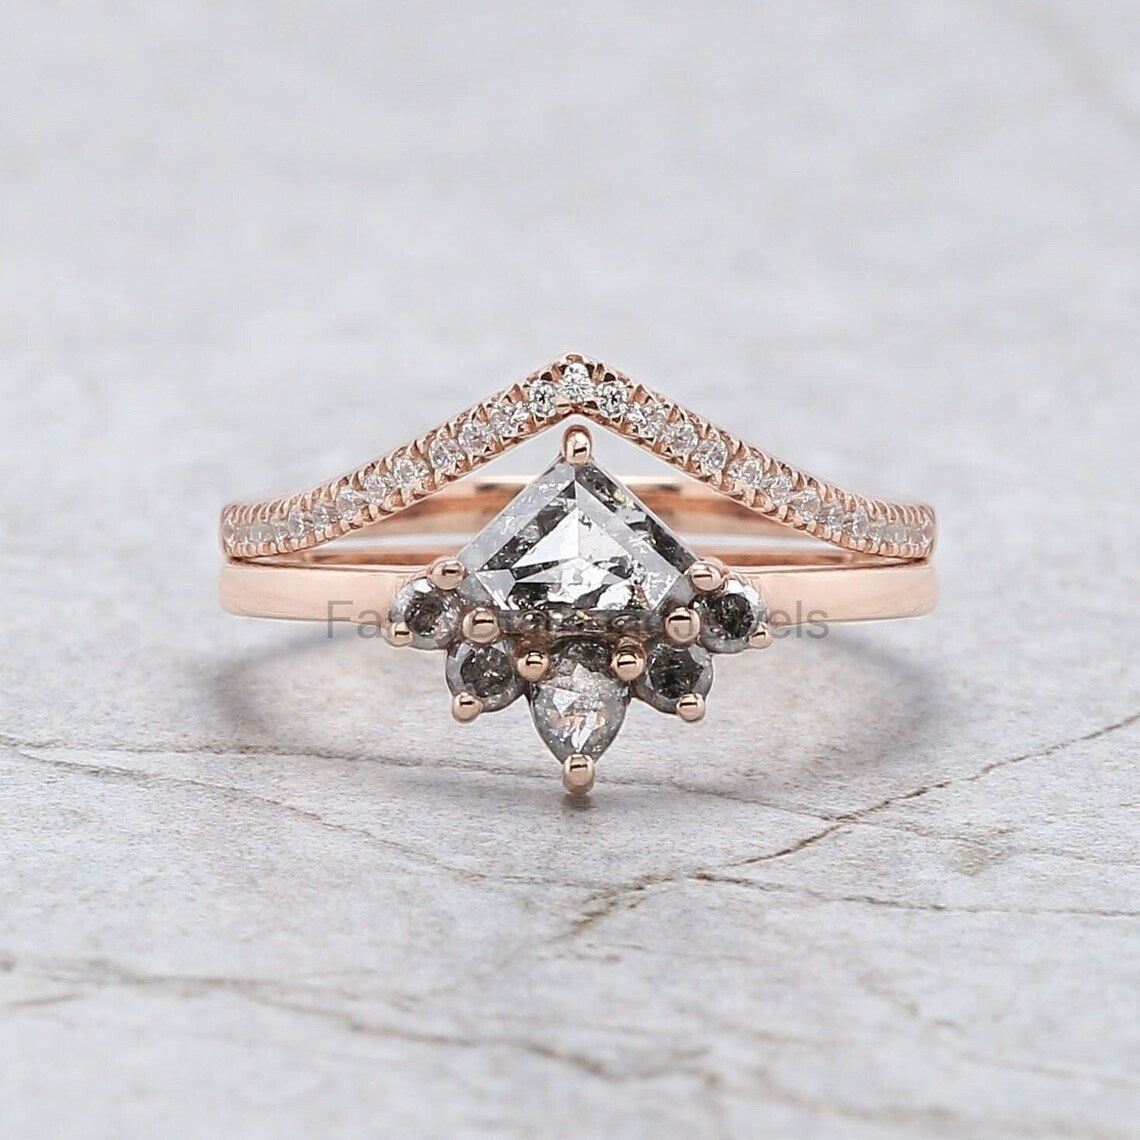 Shield Cut Salt And Pepper Diamond Ring 0.60 Ct 4.70 MM Shield Diamond Ring 14K Solid Rose Gold Silver Engagement Ring Gift For Her QN756